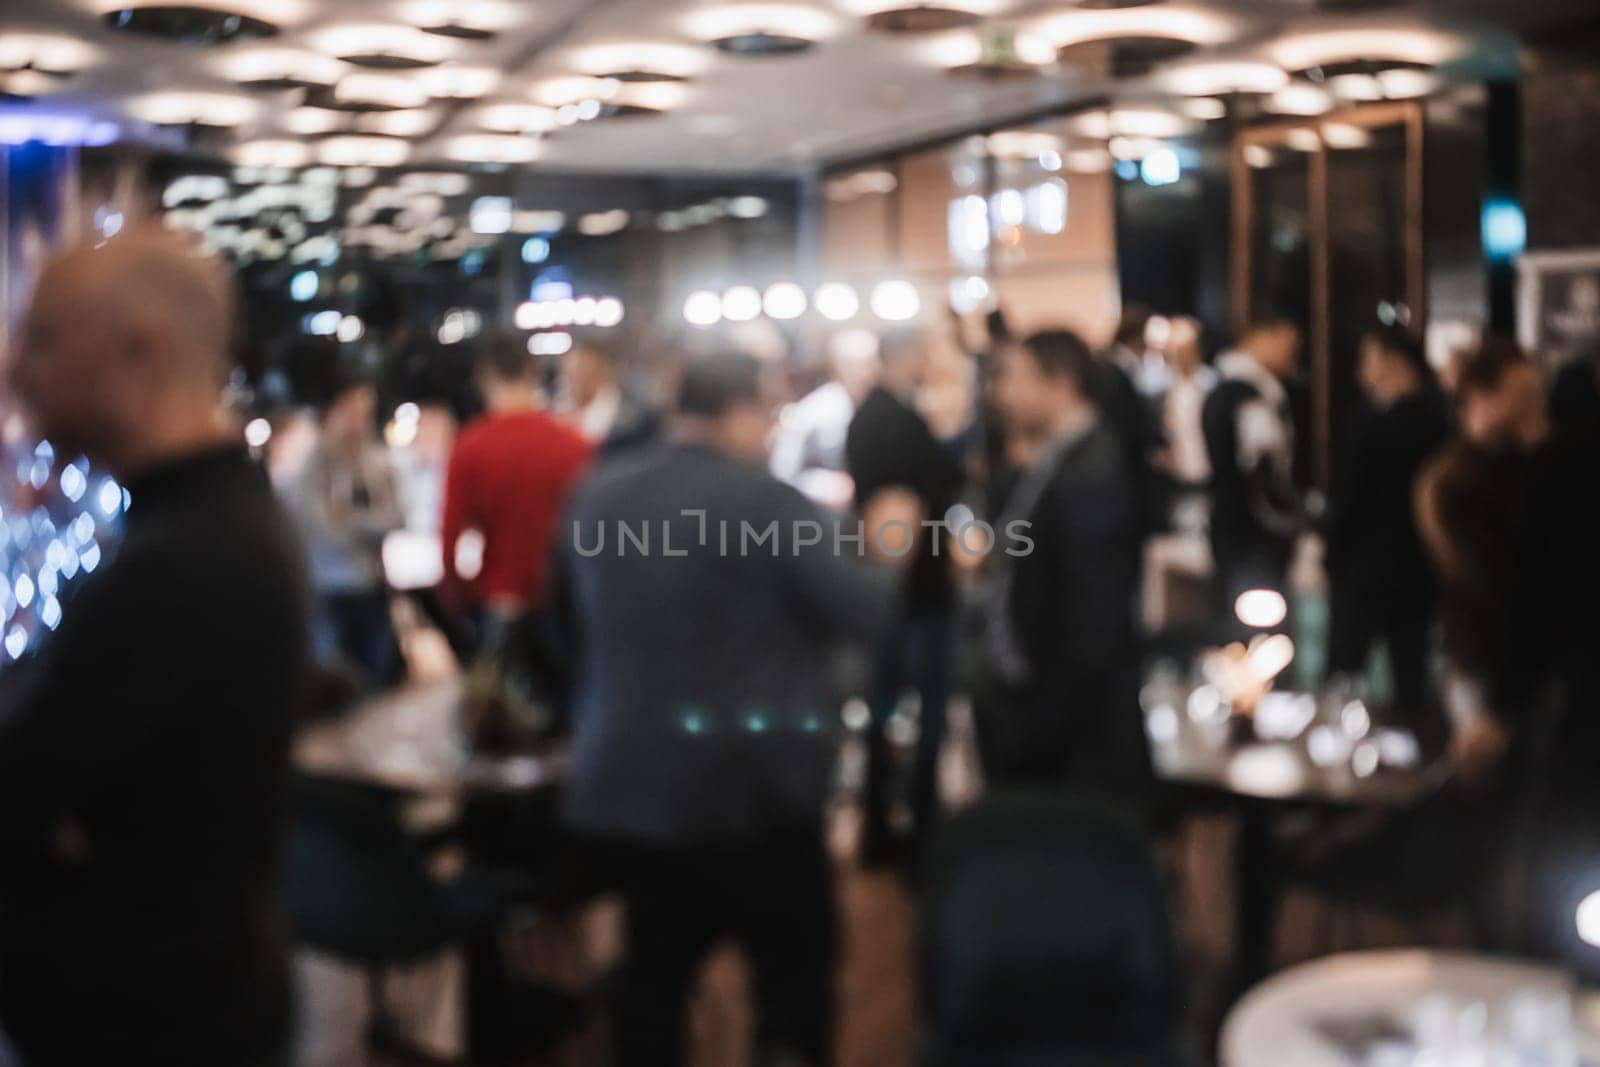 Blurred image of businesspeople at banquet event business meeting event. Business and entrepreneurship events concept by kasto